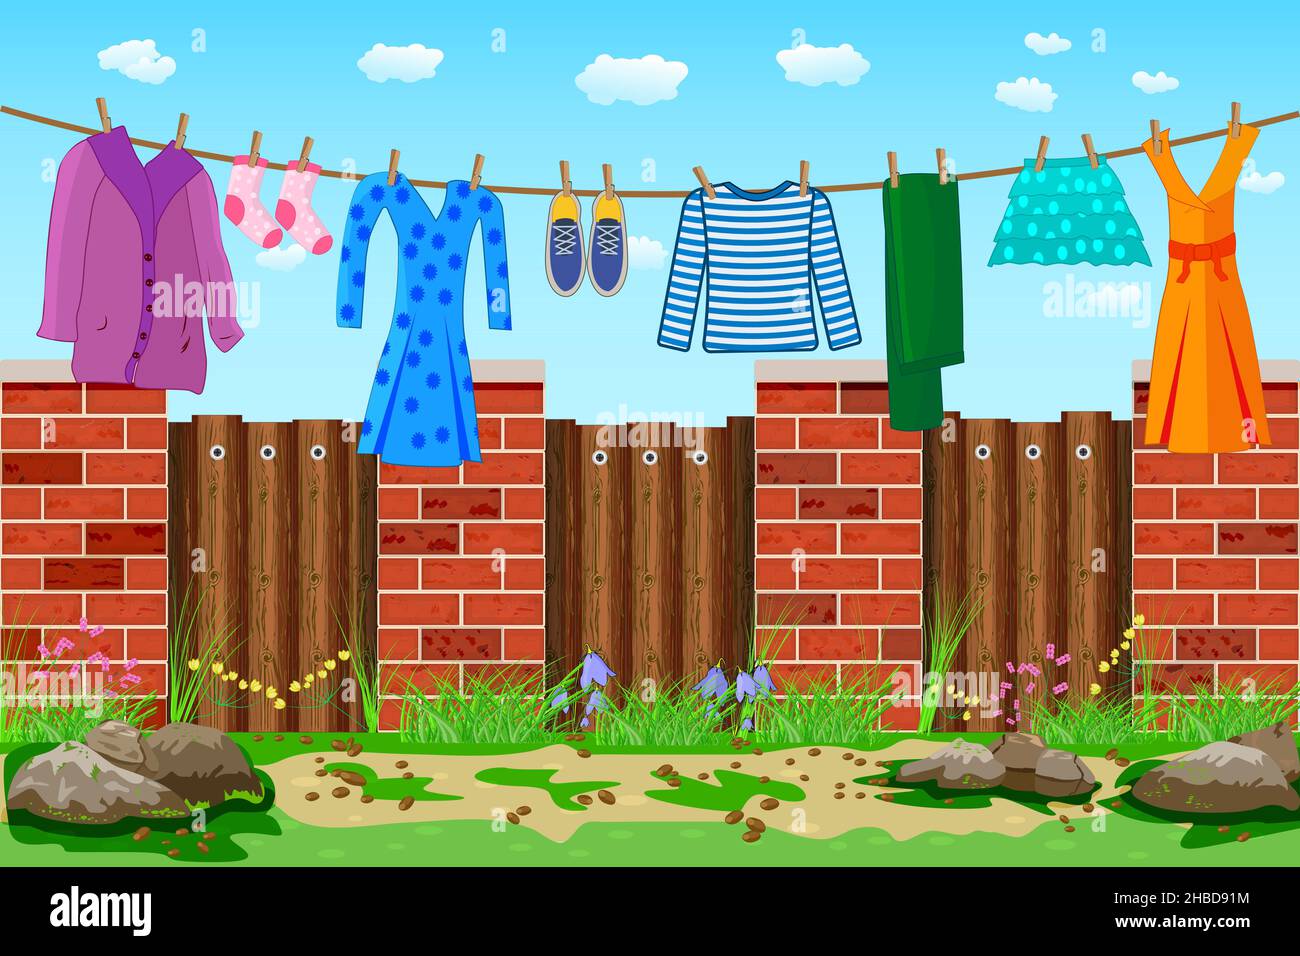 Laundry hanging on a clothesline over fence. Washing line and clothes in garden.Drying laundry in backyard.Clothes hanging on rope.Vector illustration Stock Vector